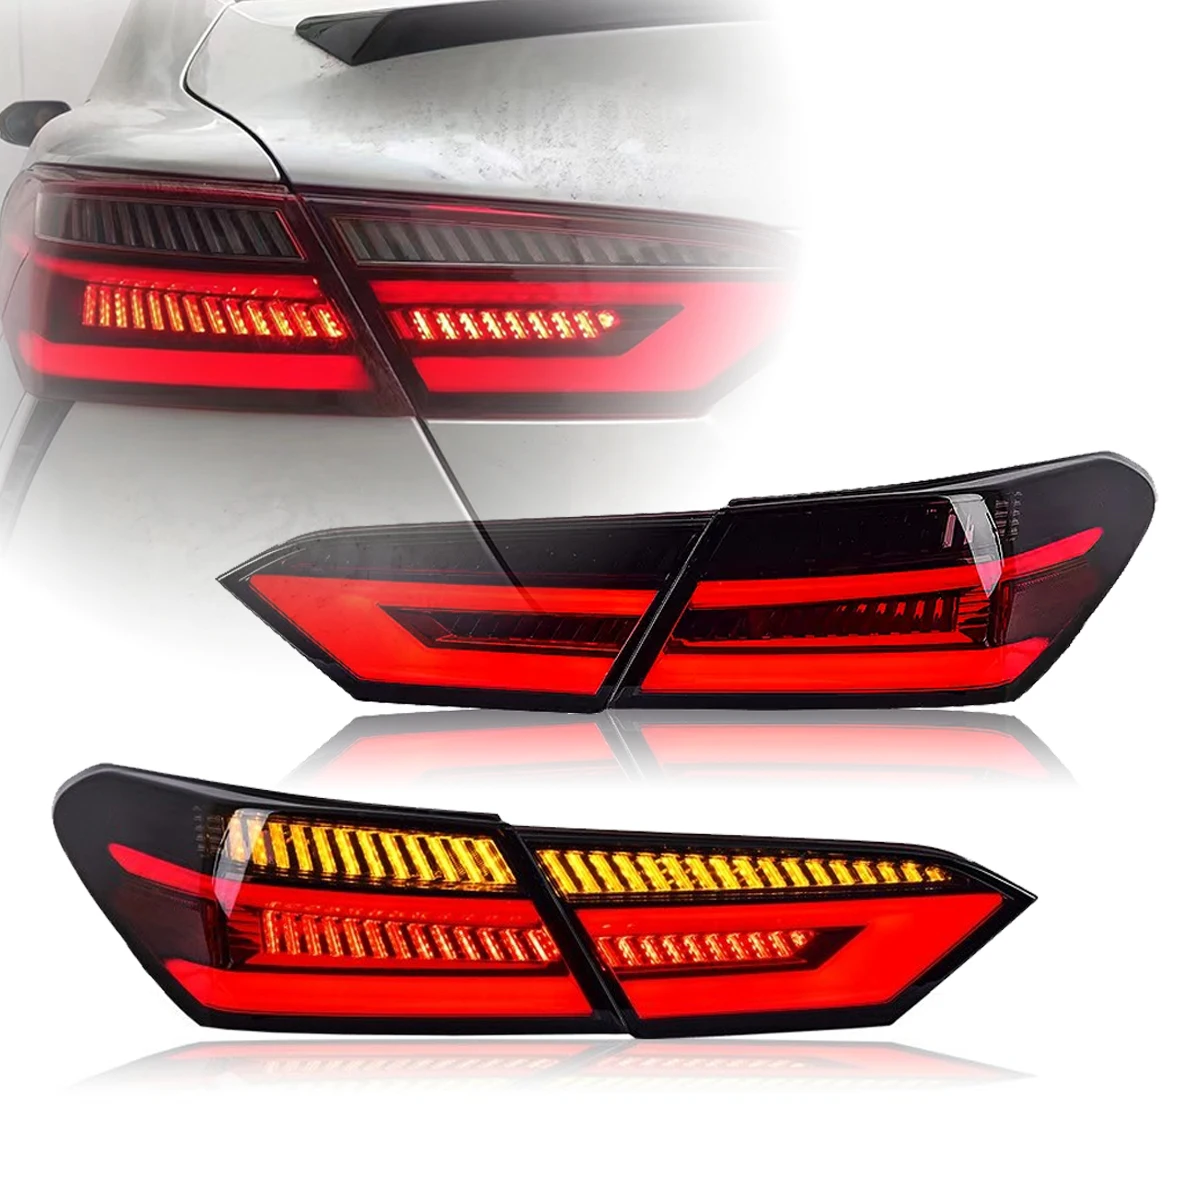 

LED Taillights Assembly For Toyota Camry 8th Gen 2018-2022 Car Light Rear Tail Lamps DRL Start-up Dynamic Lights Turn Signal